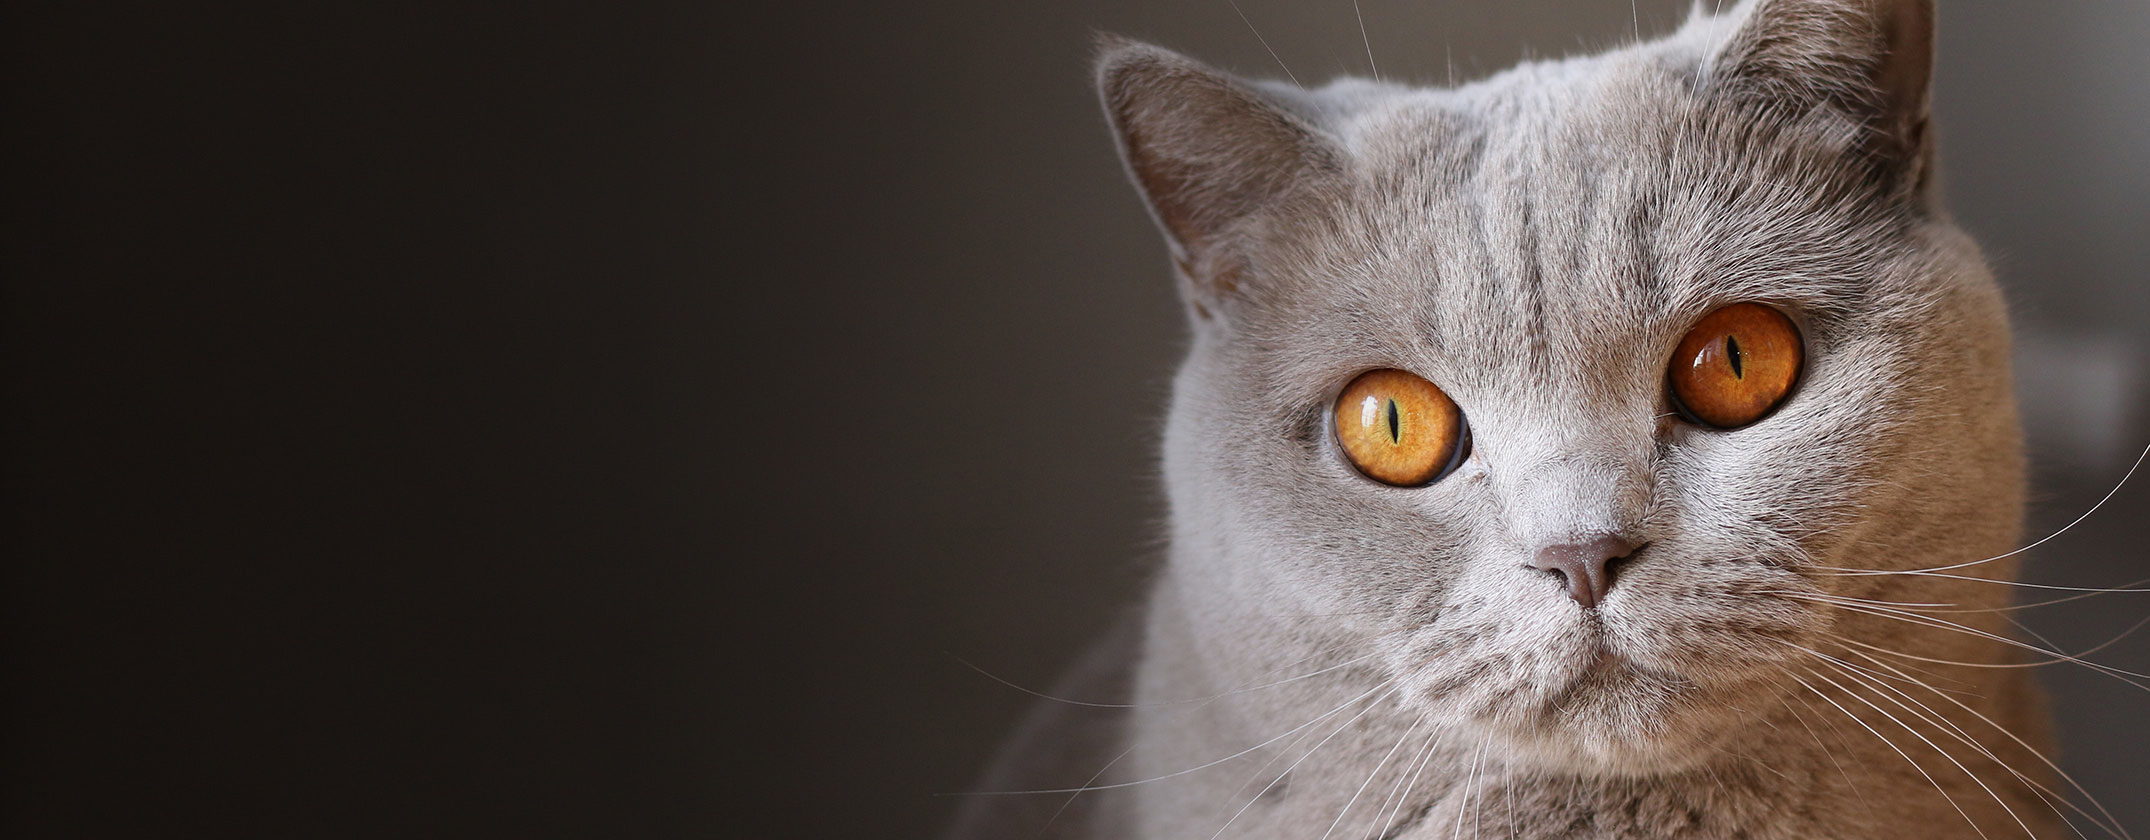 A gray cat with big orange eyes looks at the viewer.